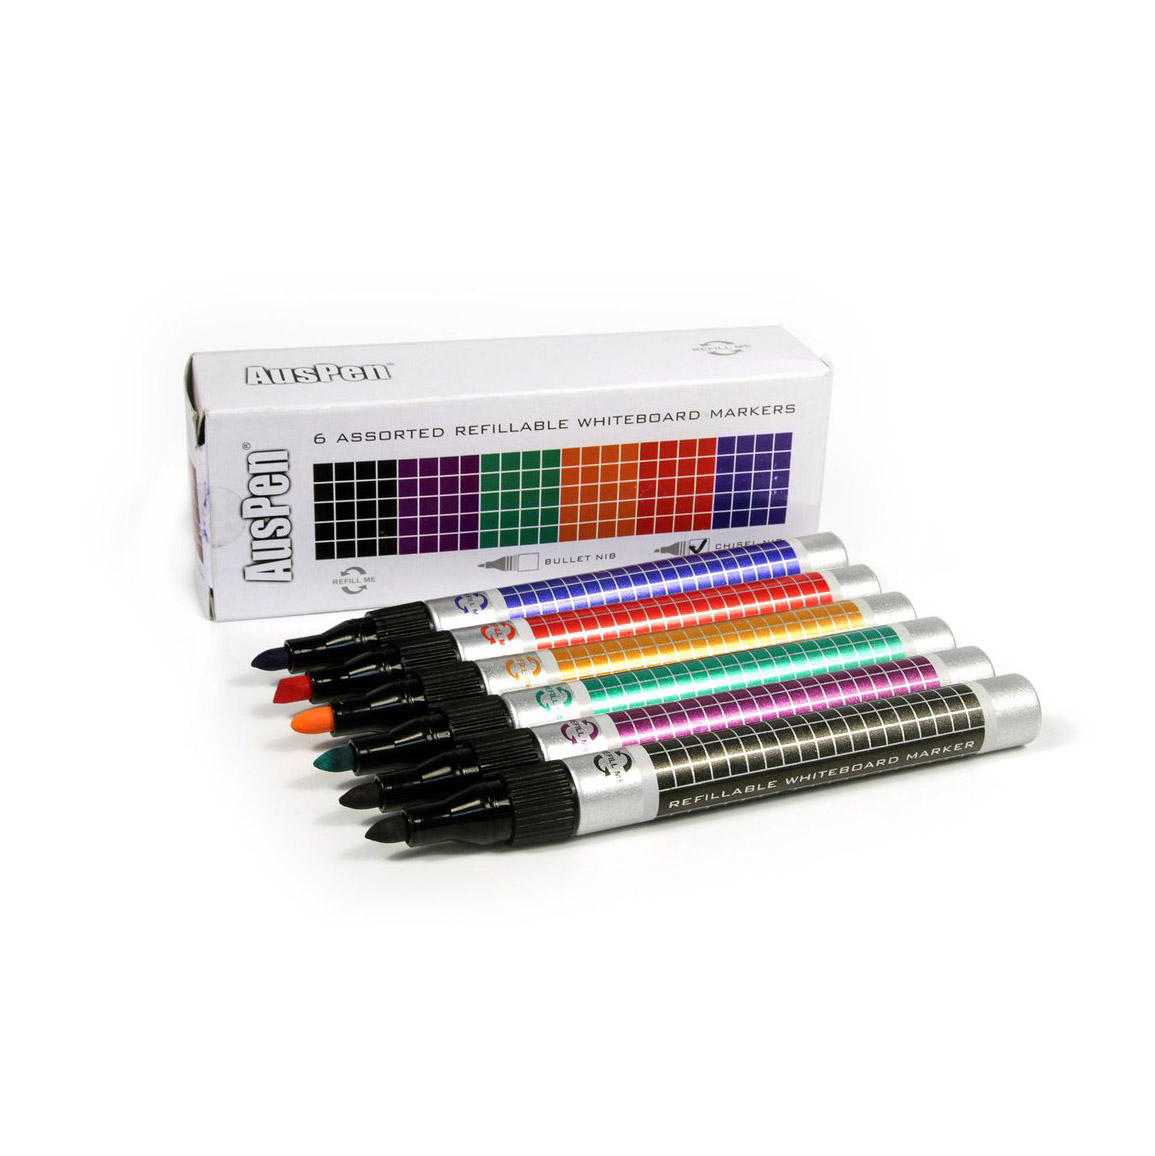 Refillable whiteboard markers